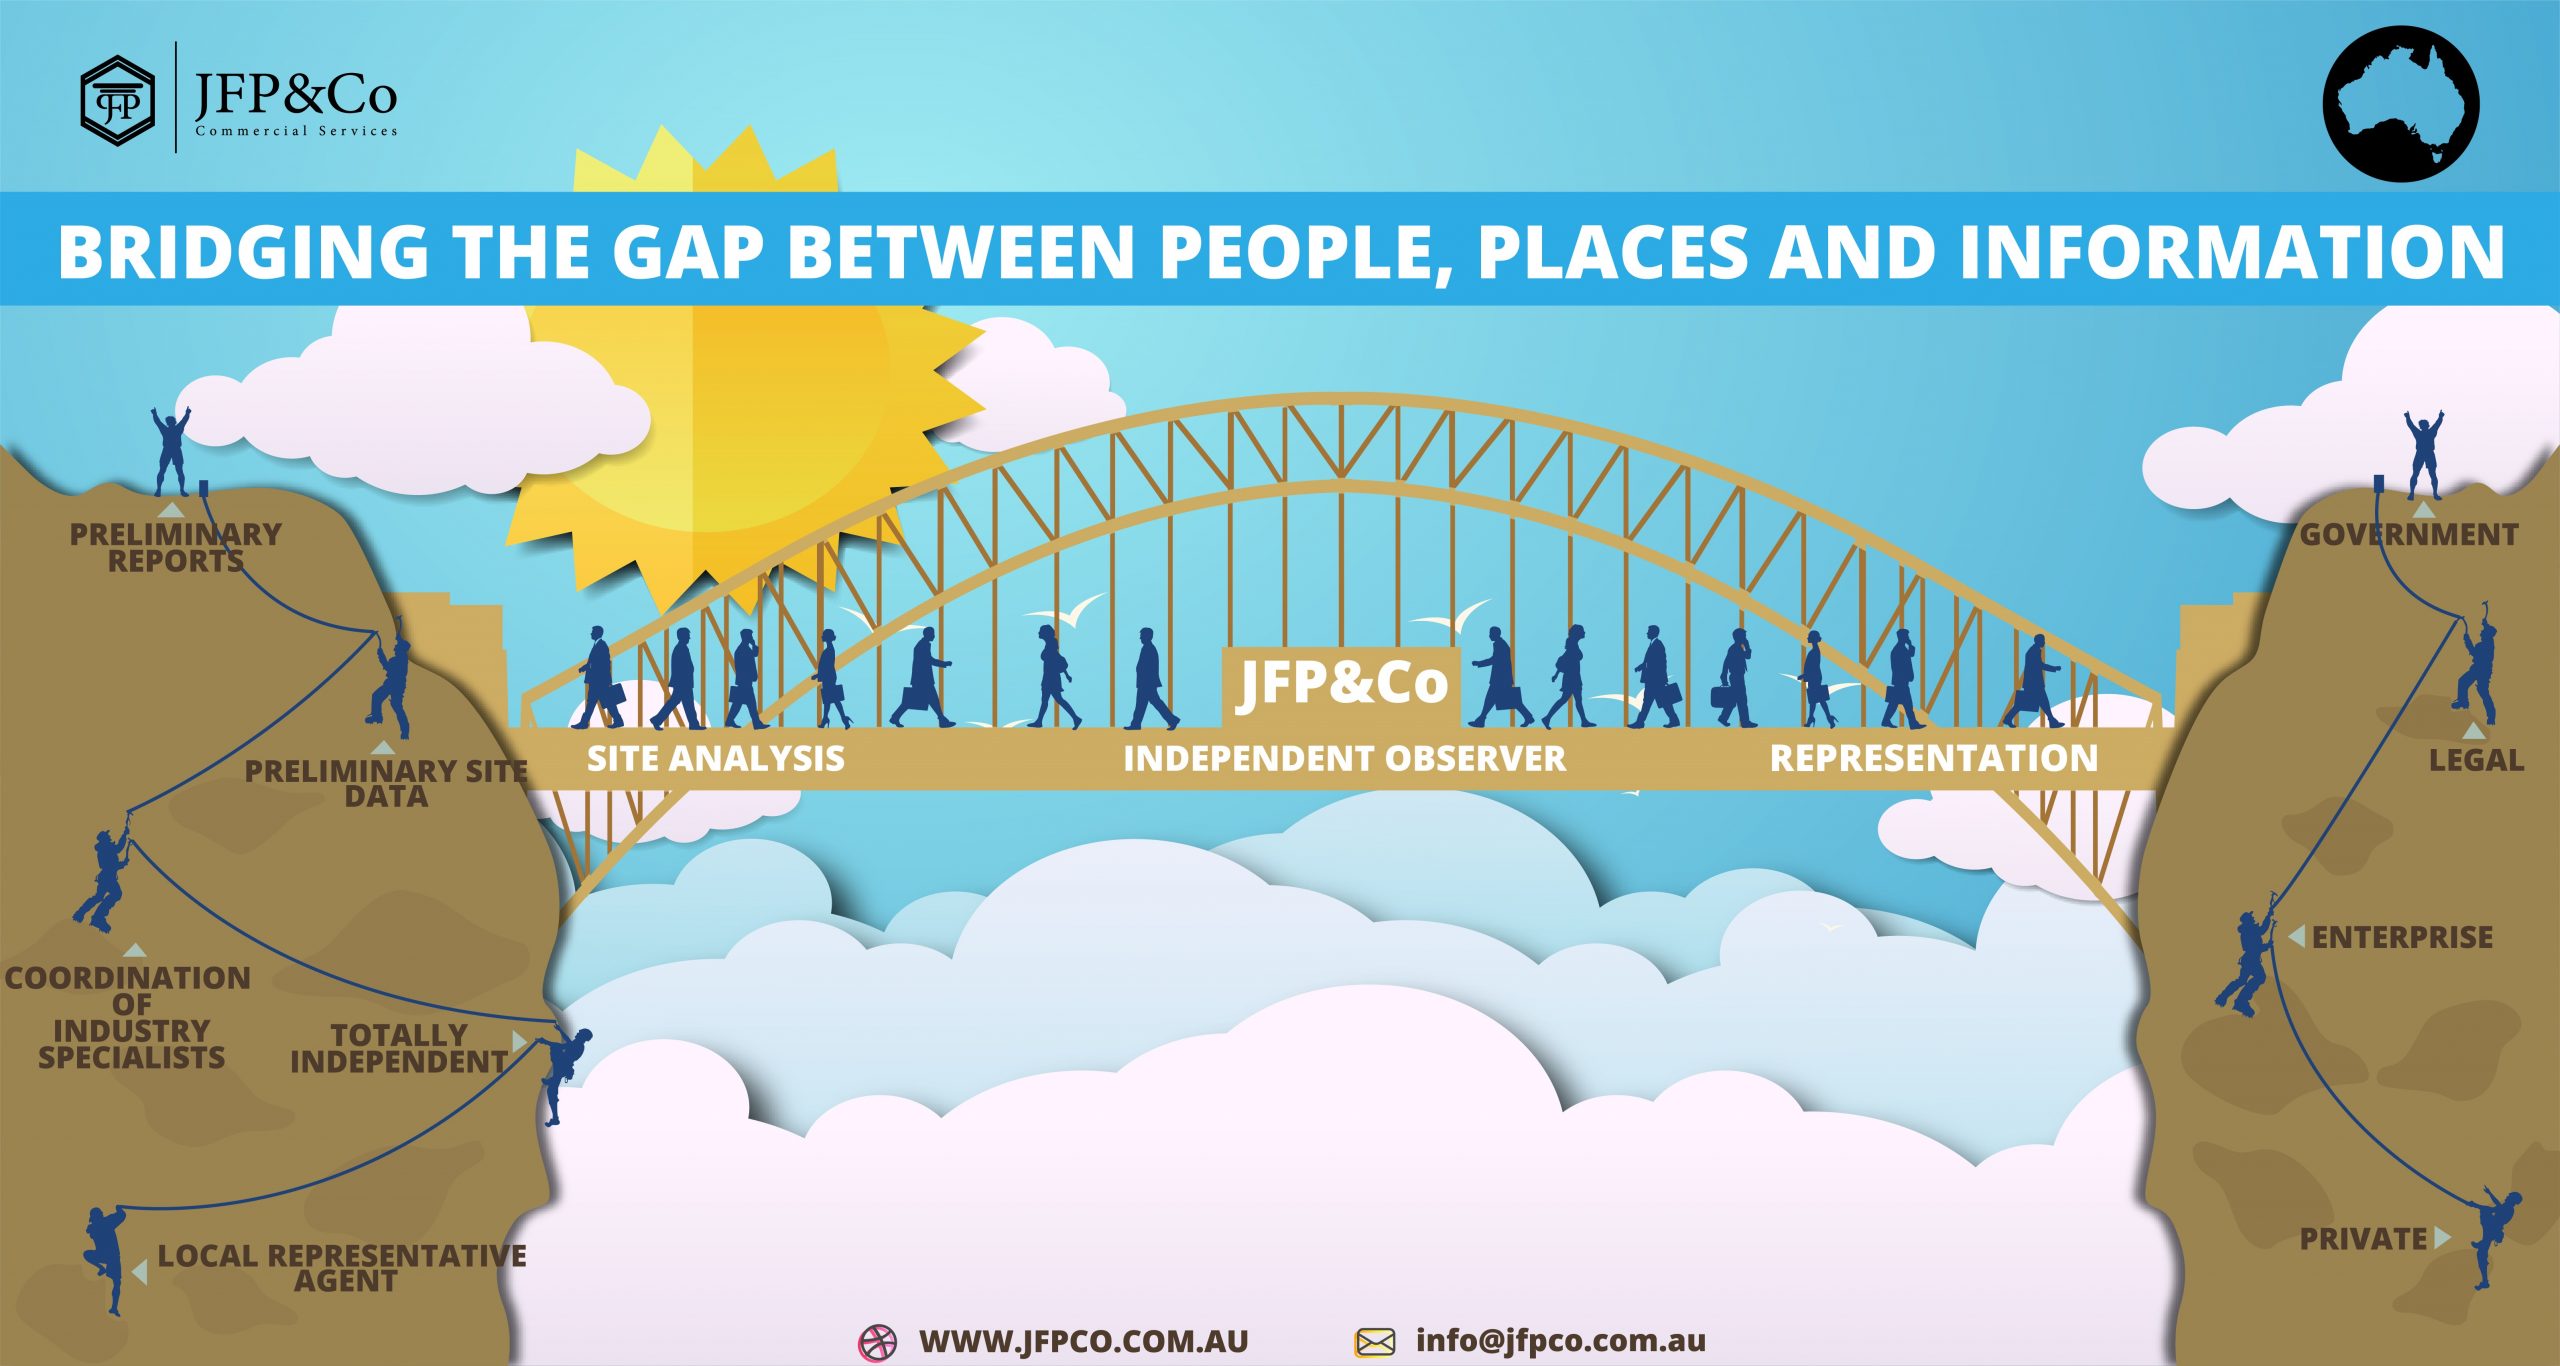 Bridging the gap between people, places and information